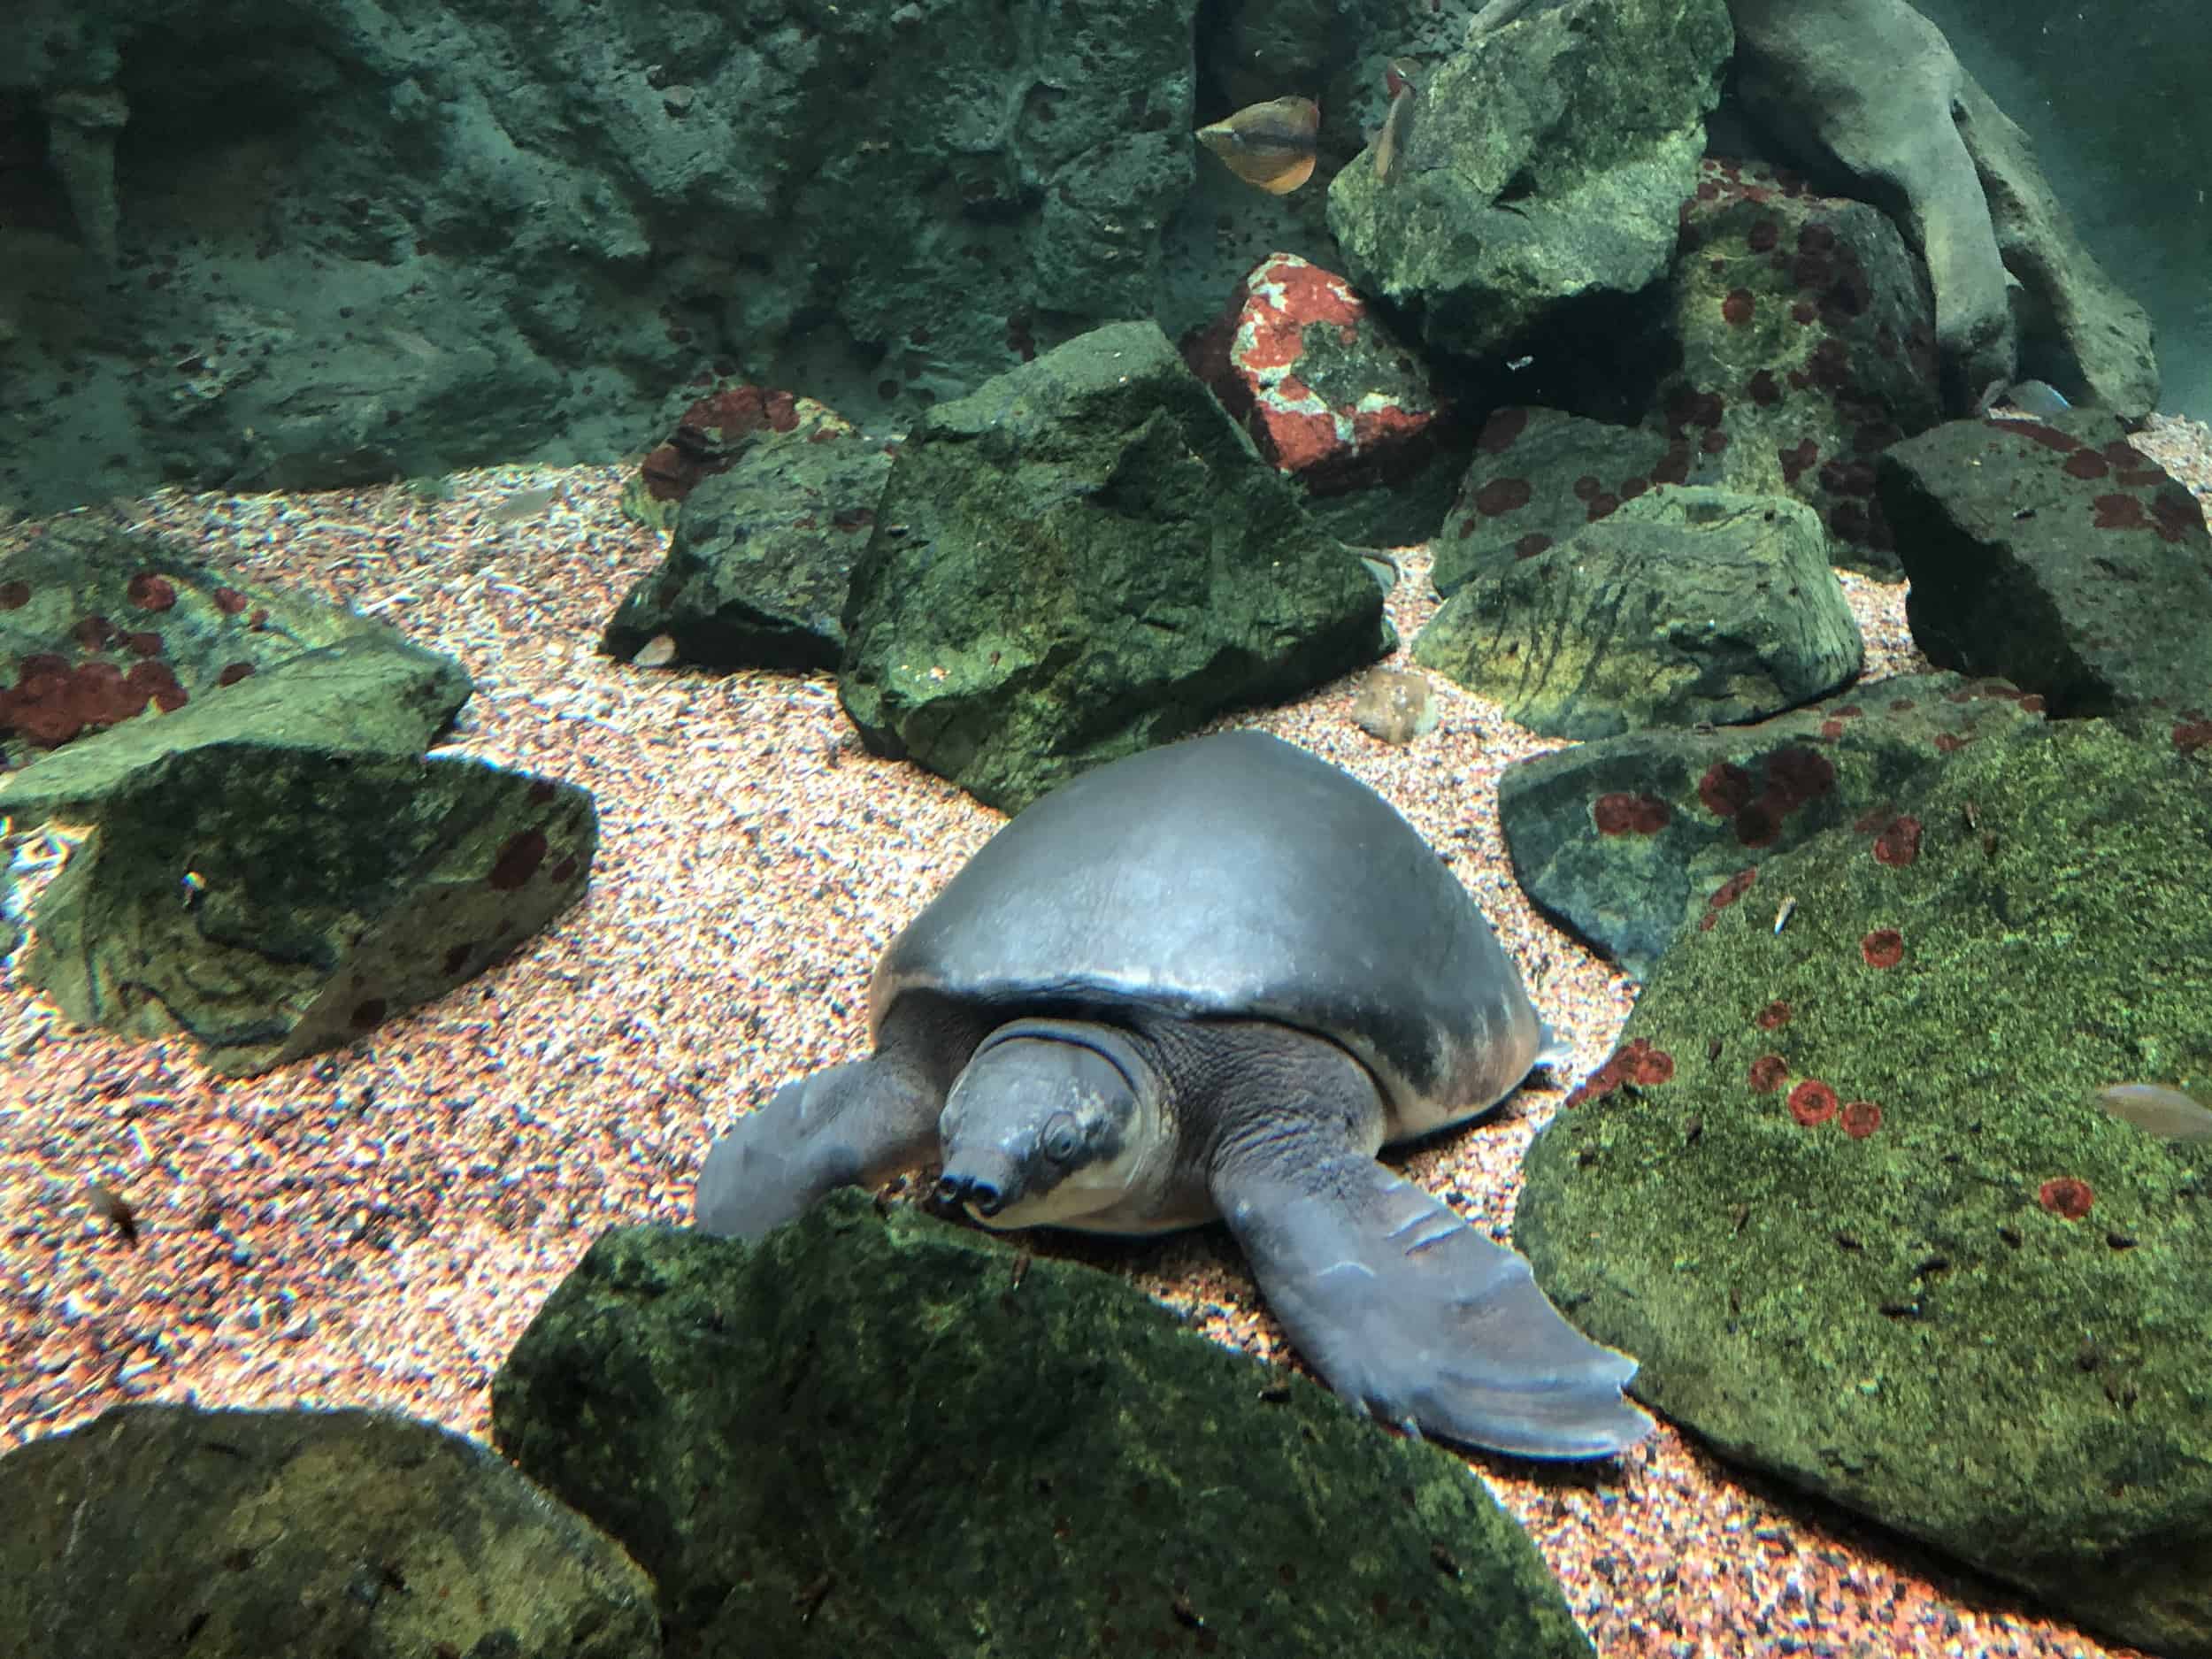 Fly river turtle in Rivers on the Main Level at the Shedd Aquarium in Chicago, Illinois